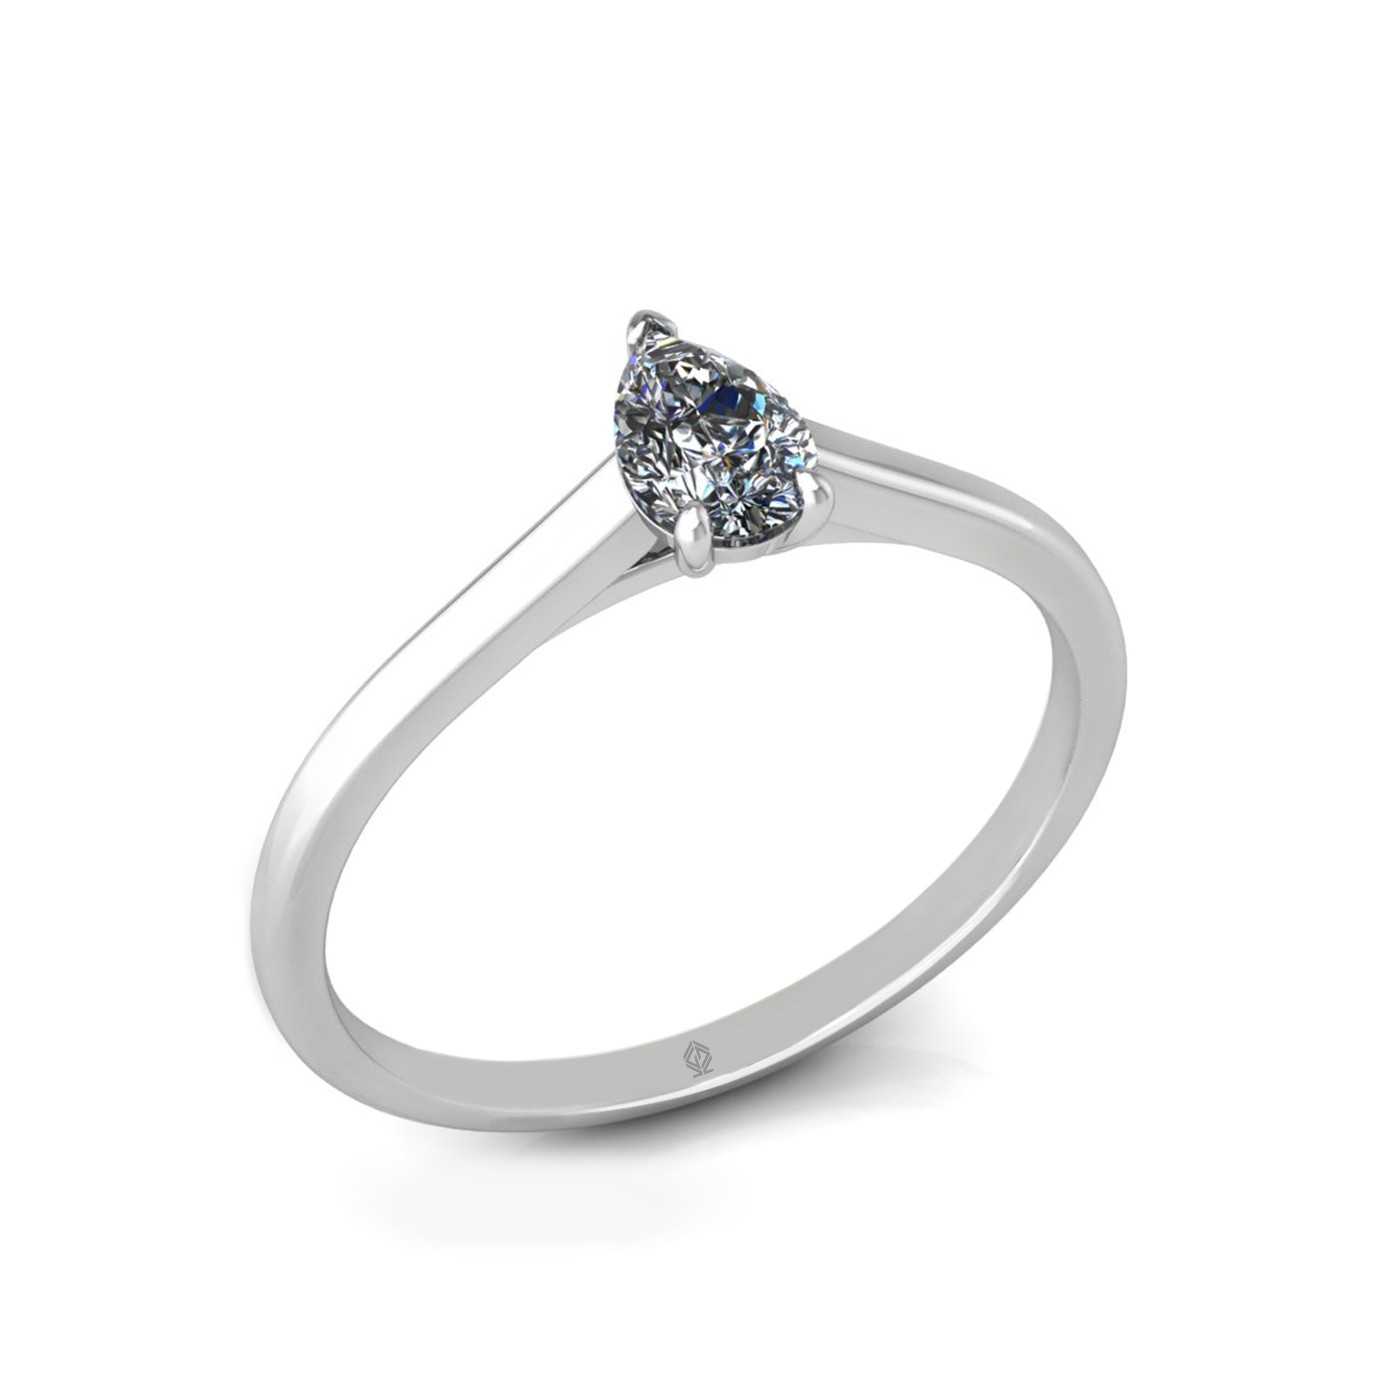 18k white gold  0,30 ct 3 prongs solitaire pear cut diamond engagement ring with whisper thin band